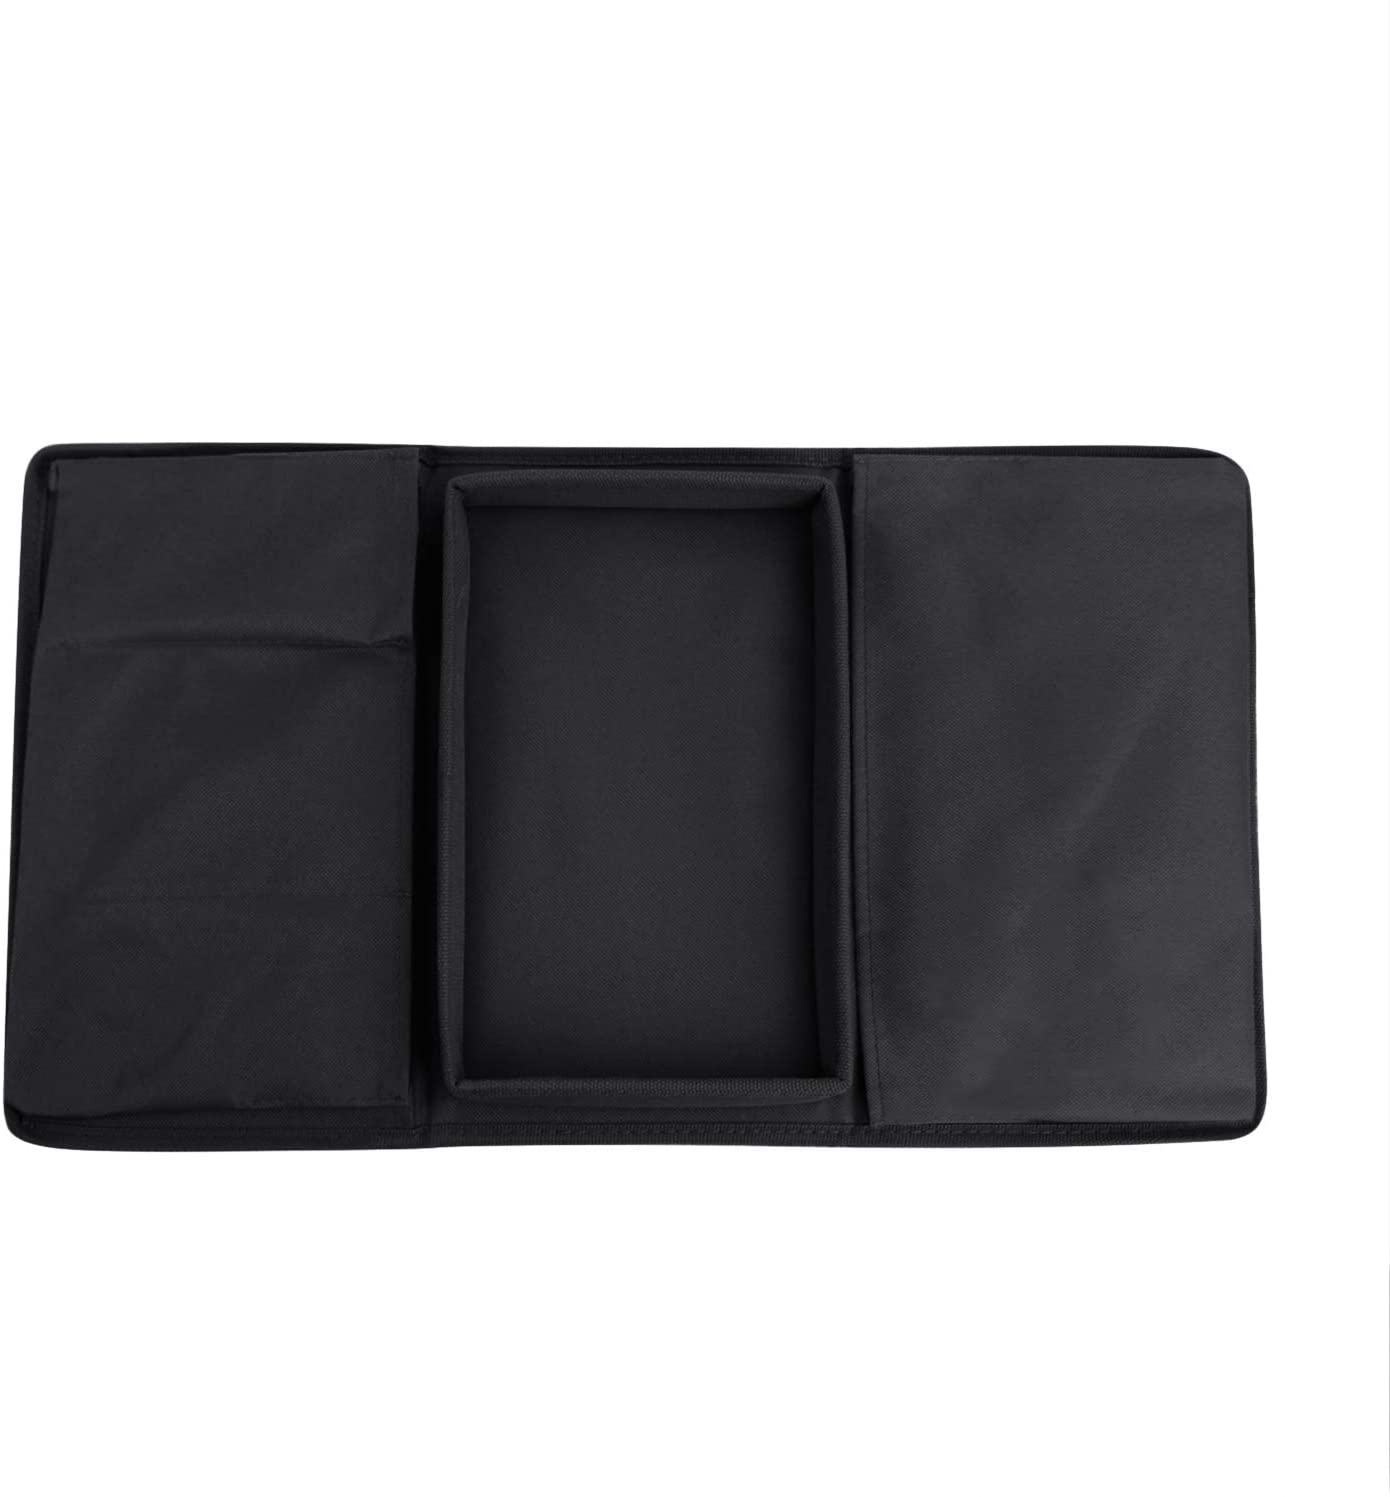 Kusmil Sofa Armrest Organizer with Cup Holder Tray Recliner Couch Armchair Caddy Bedside Storage Pockets Bag for Cellphone Tablet Book Magazines - image 2 of 6